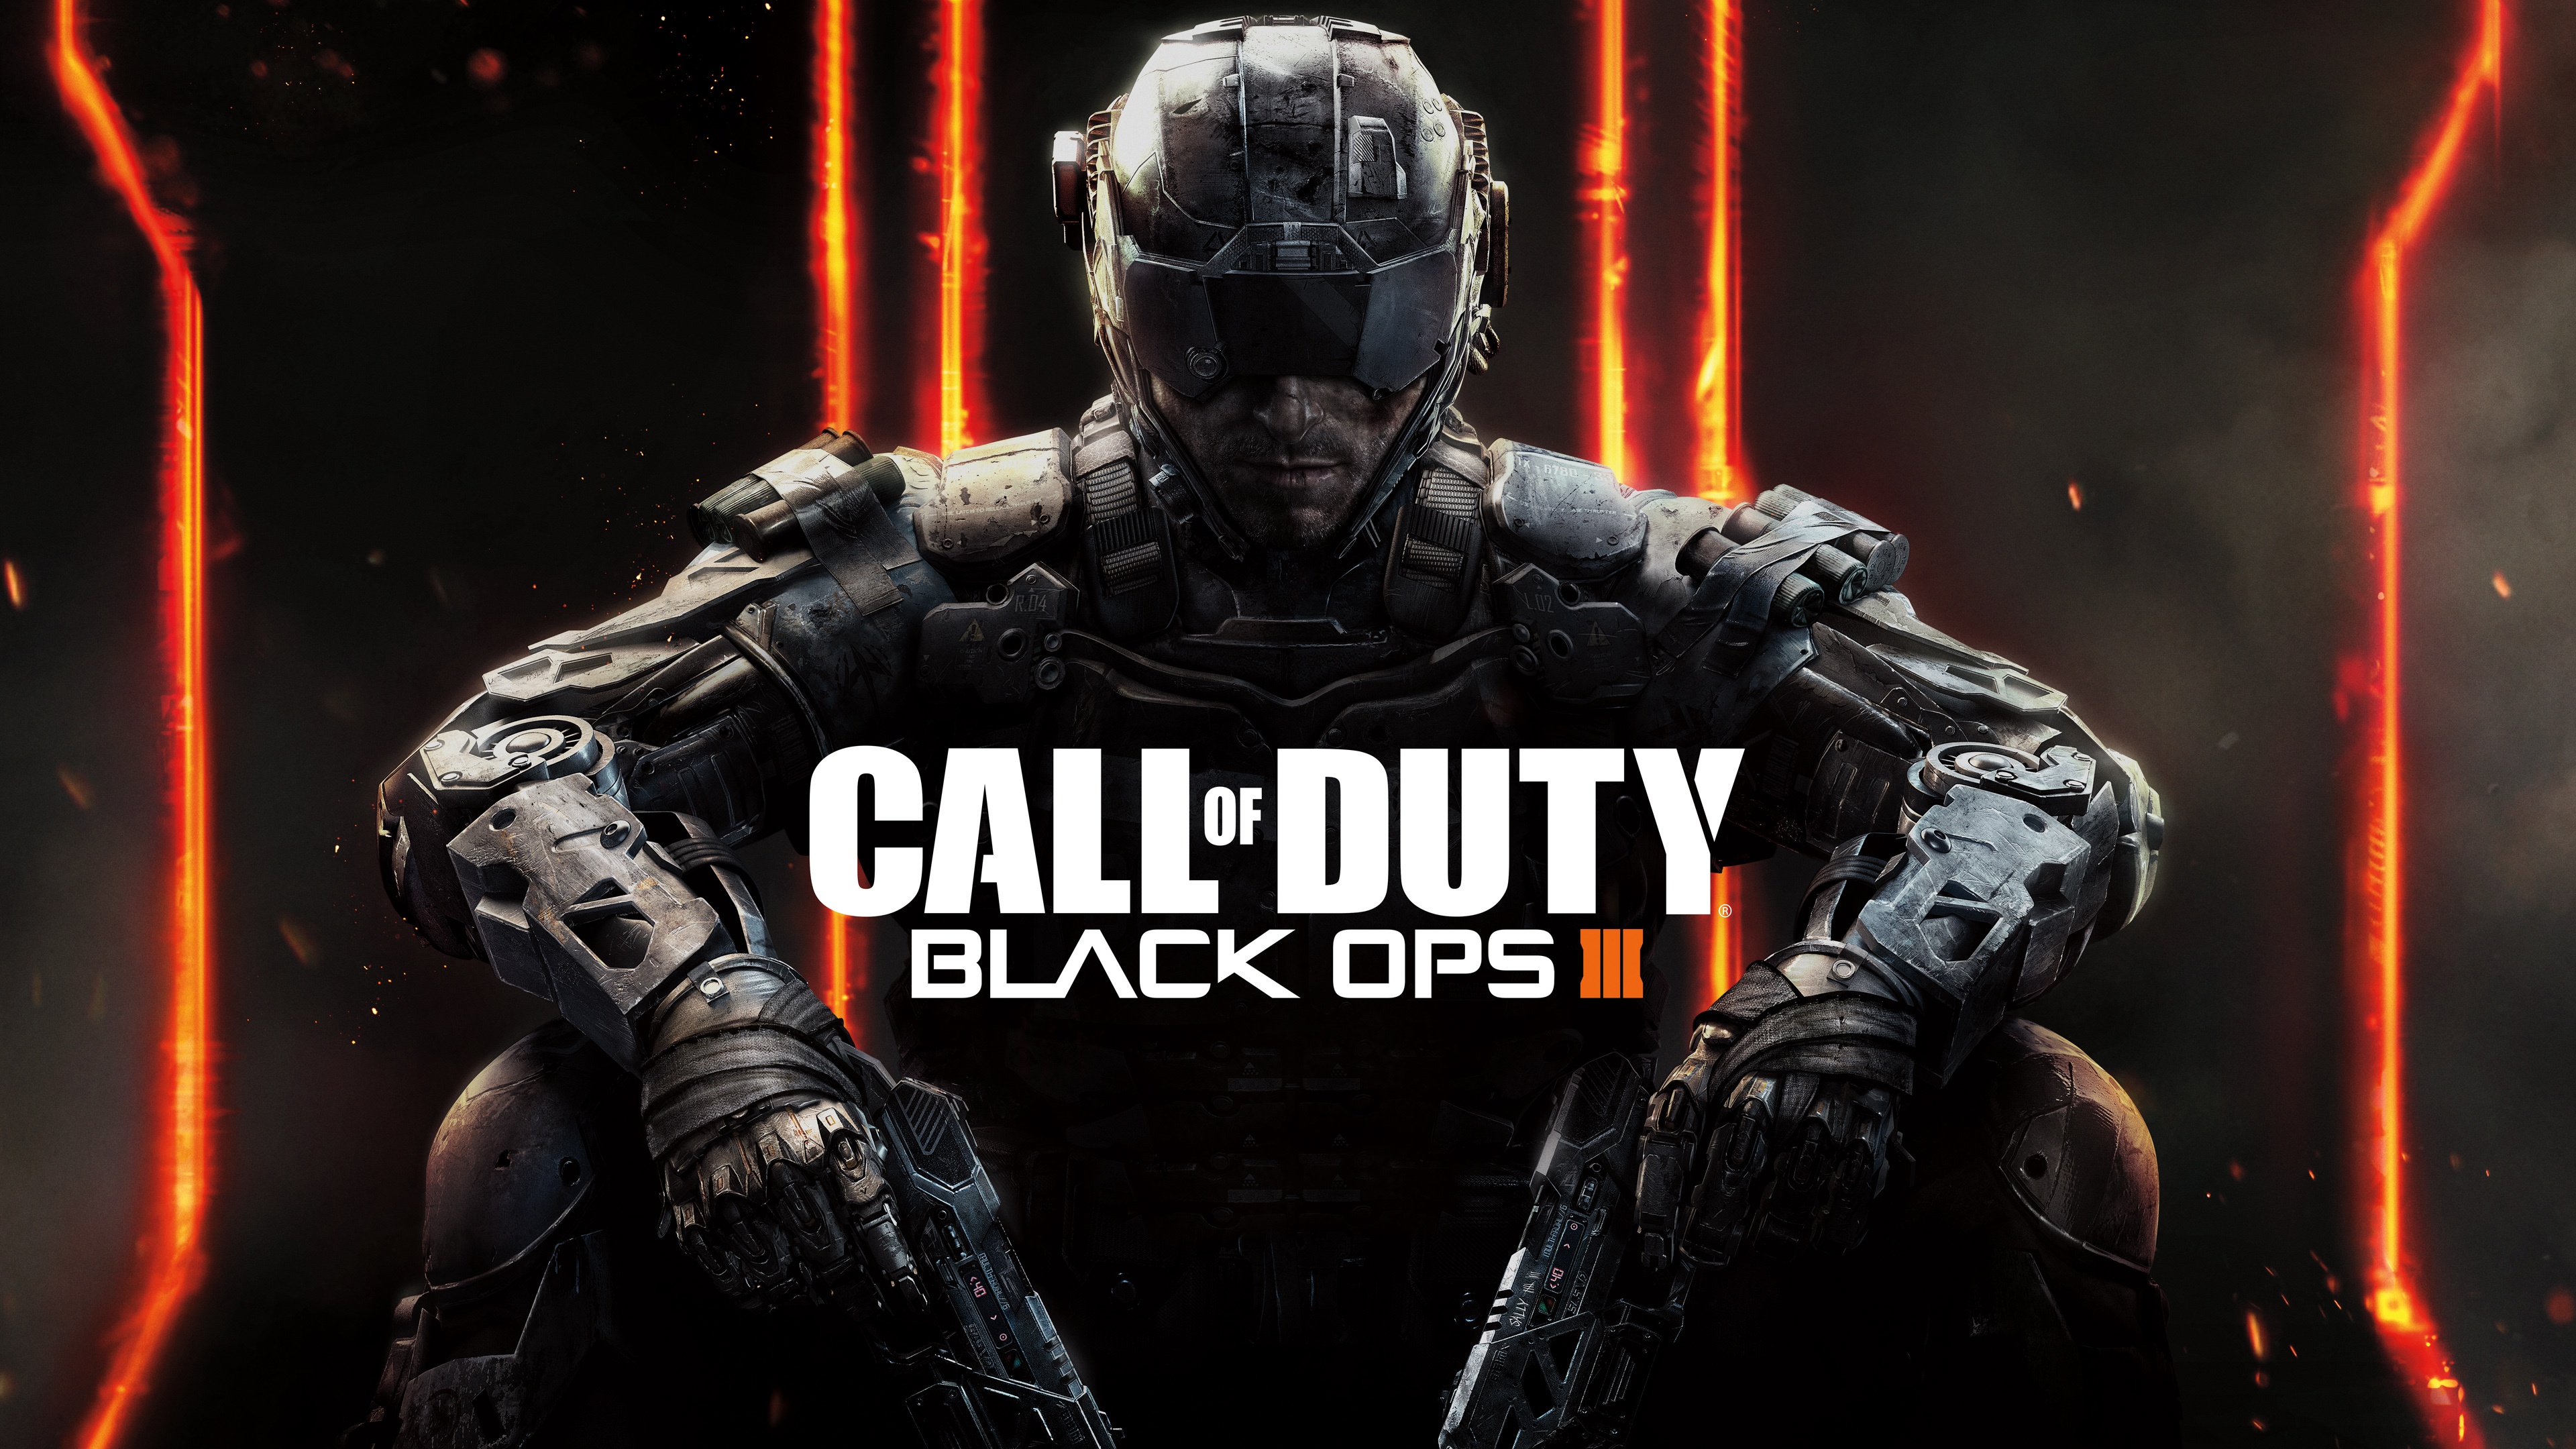 Call of Duty Black Ops III Wallpapers HD Wallpapers 3840x2160